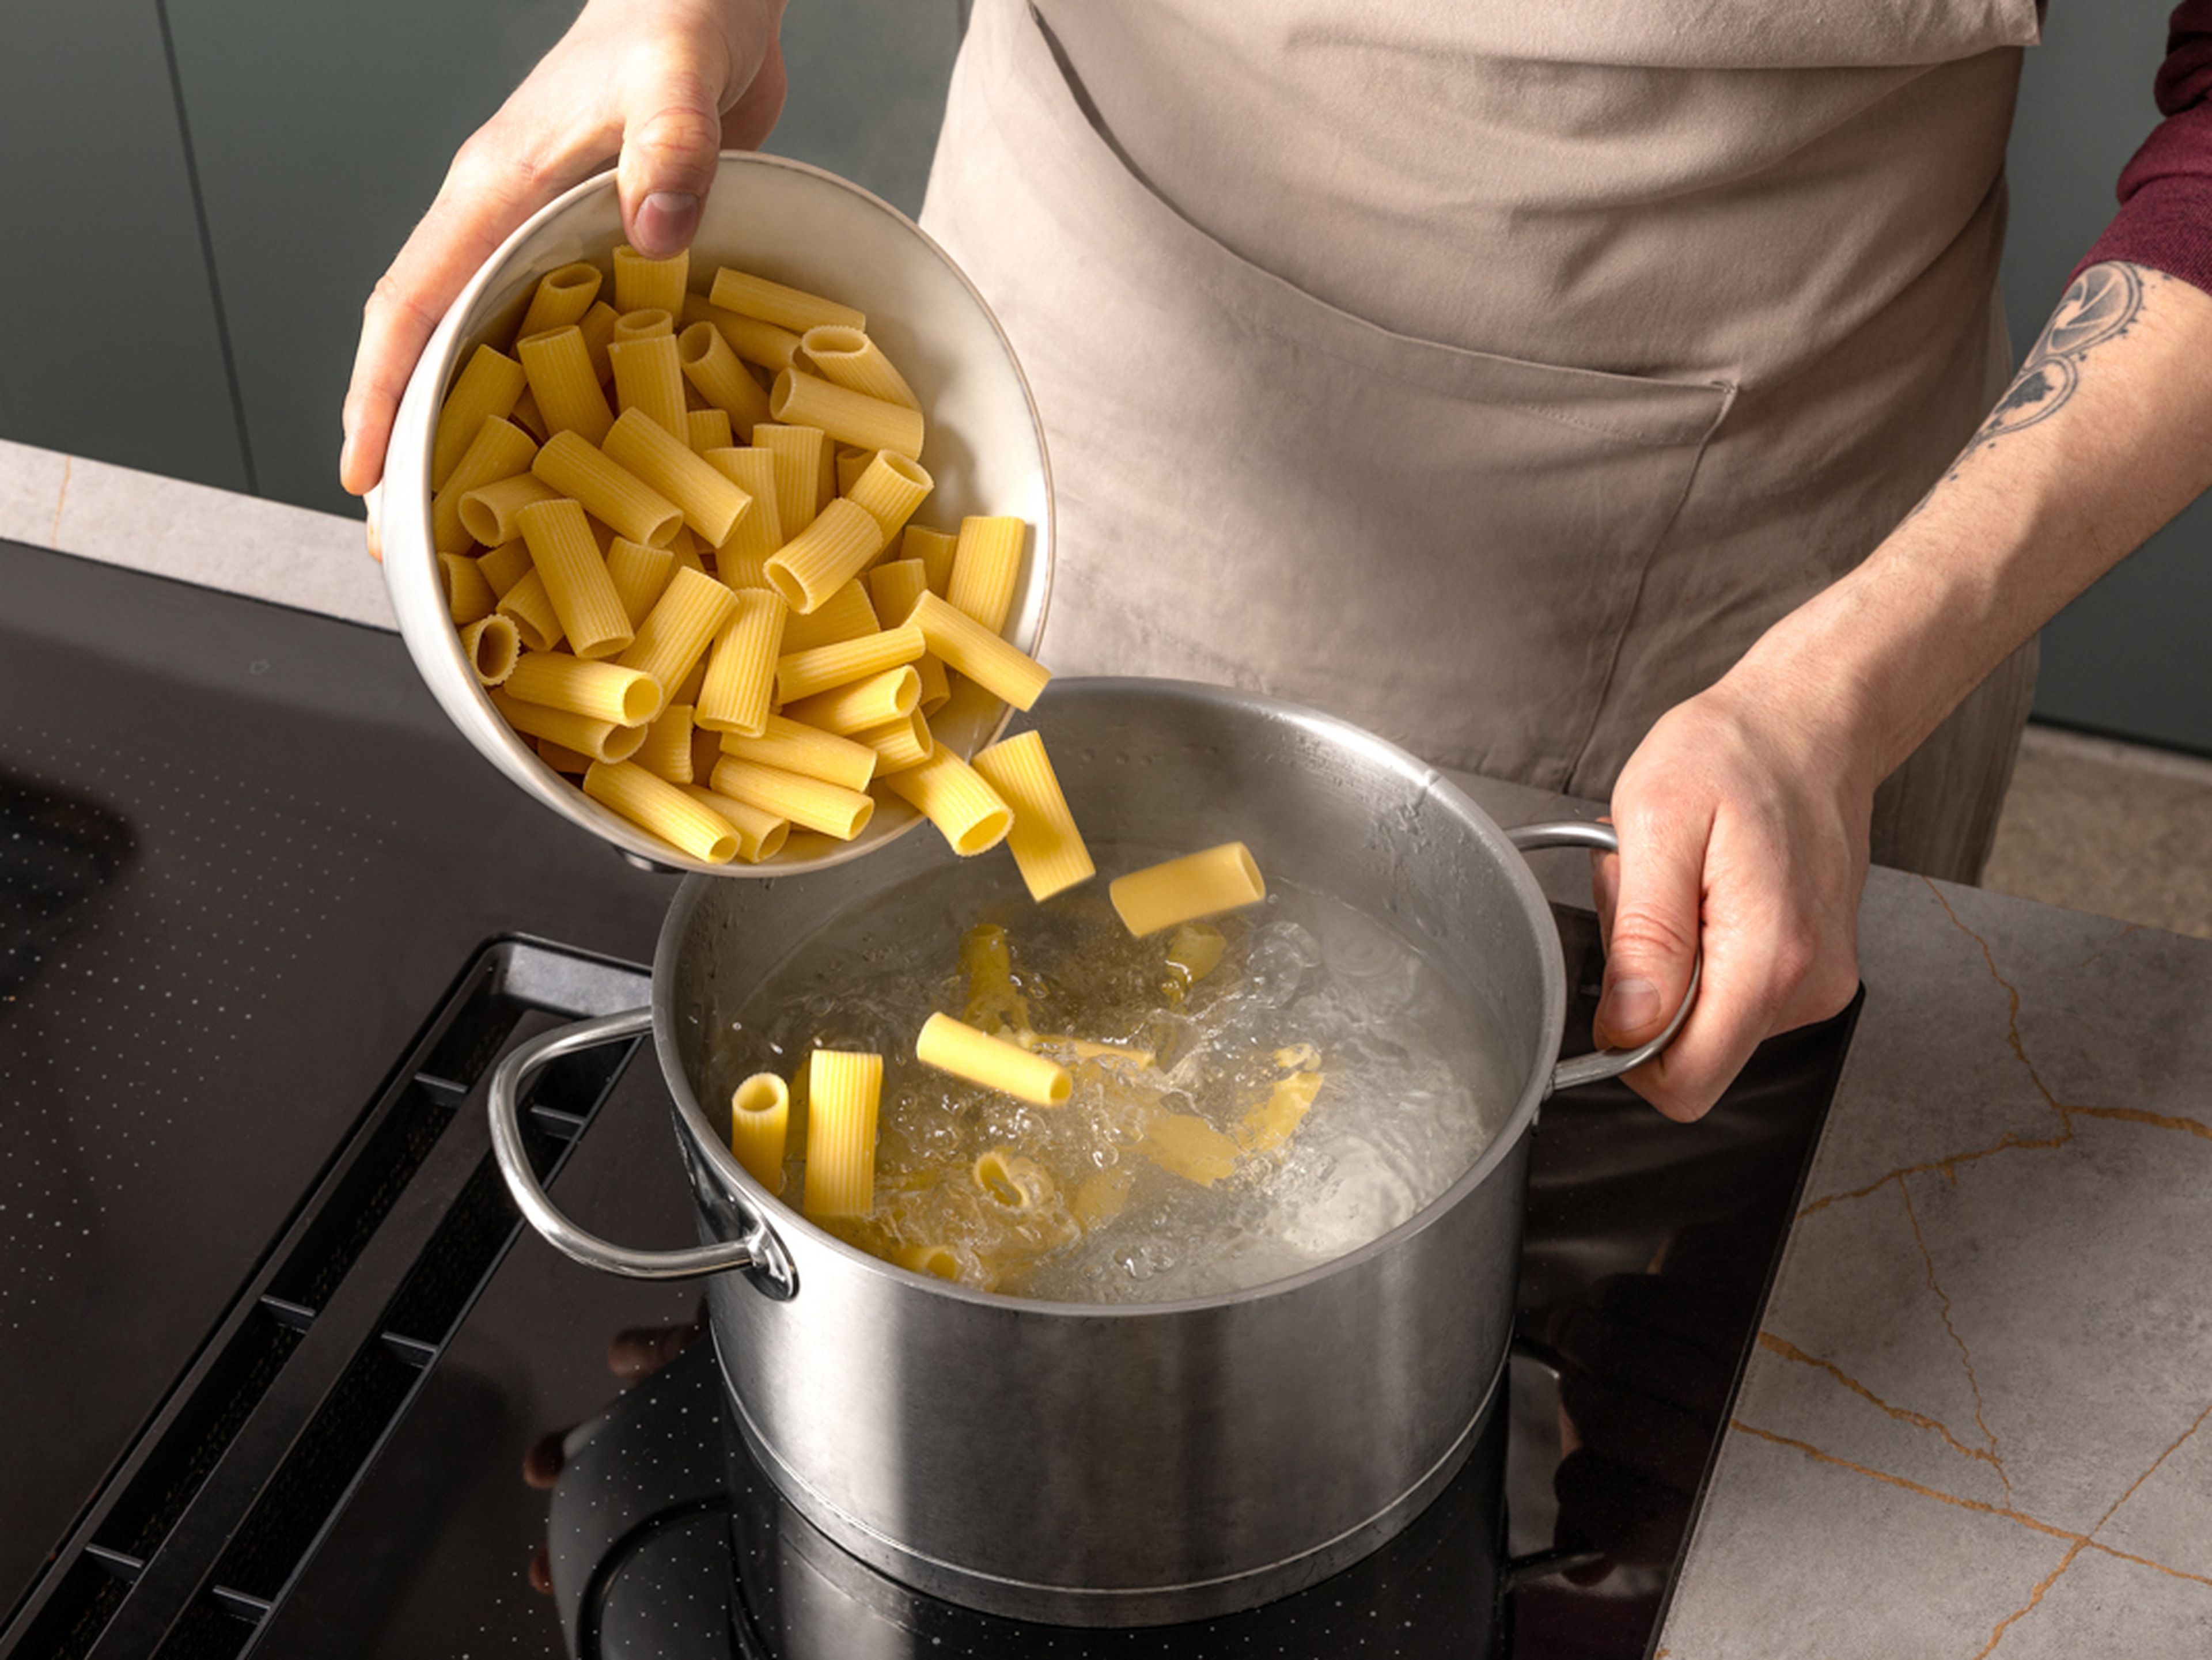 Fill a large pot with plenty of water, add salt and bring to a boil. Add pasta to boiling water and cook for approx. 2 min. shorter than your normal cooking time or package instructions. After about 5 min. of cooking, scoop up about 250 ml of the pasta water and set aside. At the end of cooking time, drain the pasta through a sieve.